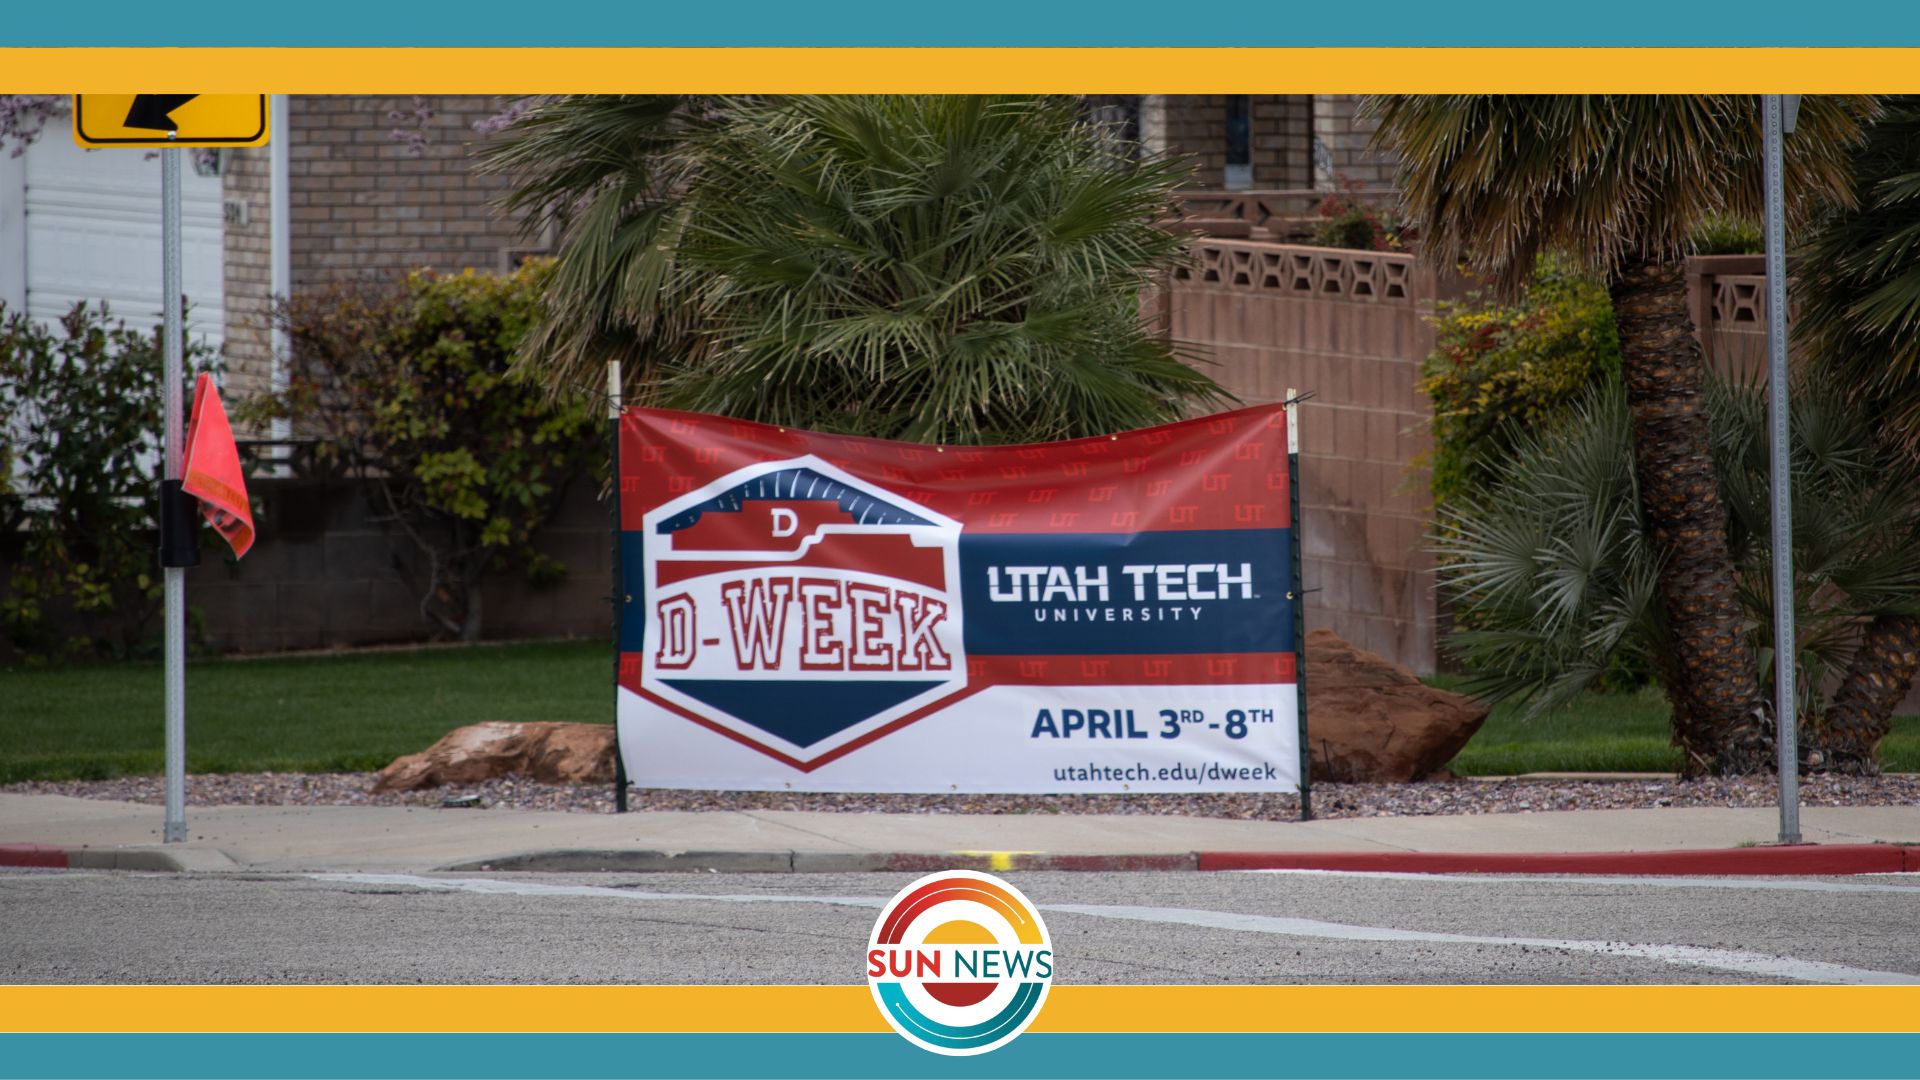 Utah Tech’s first D-Week will carry out the same traditions as previous years